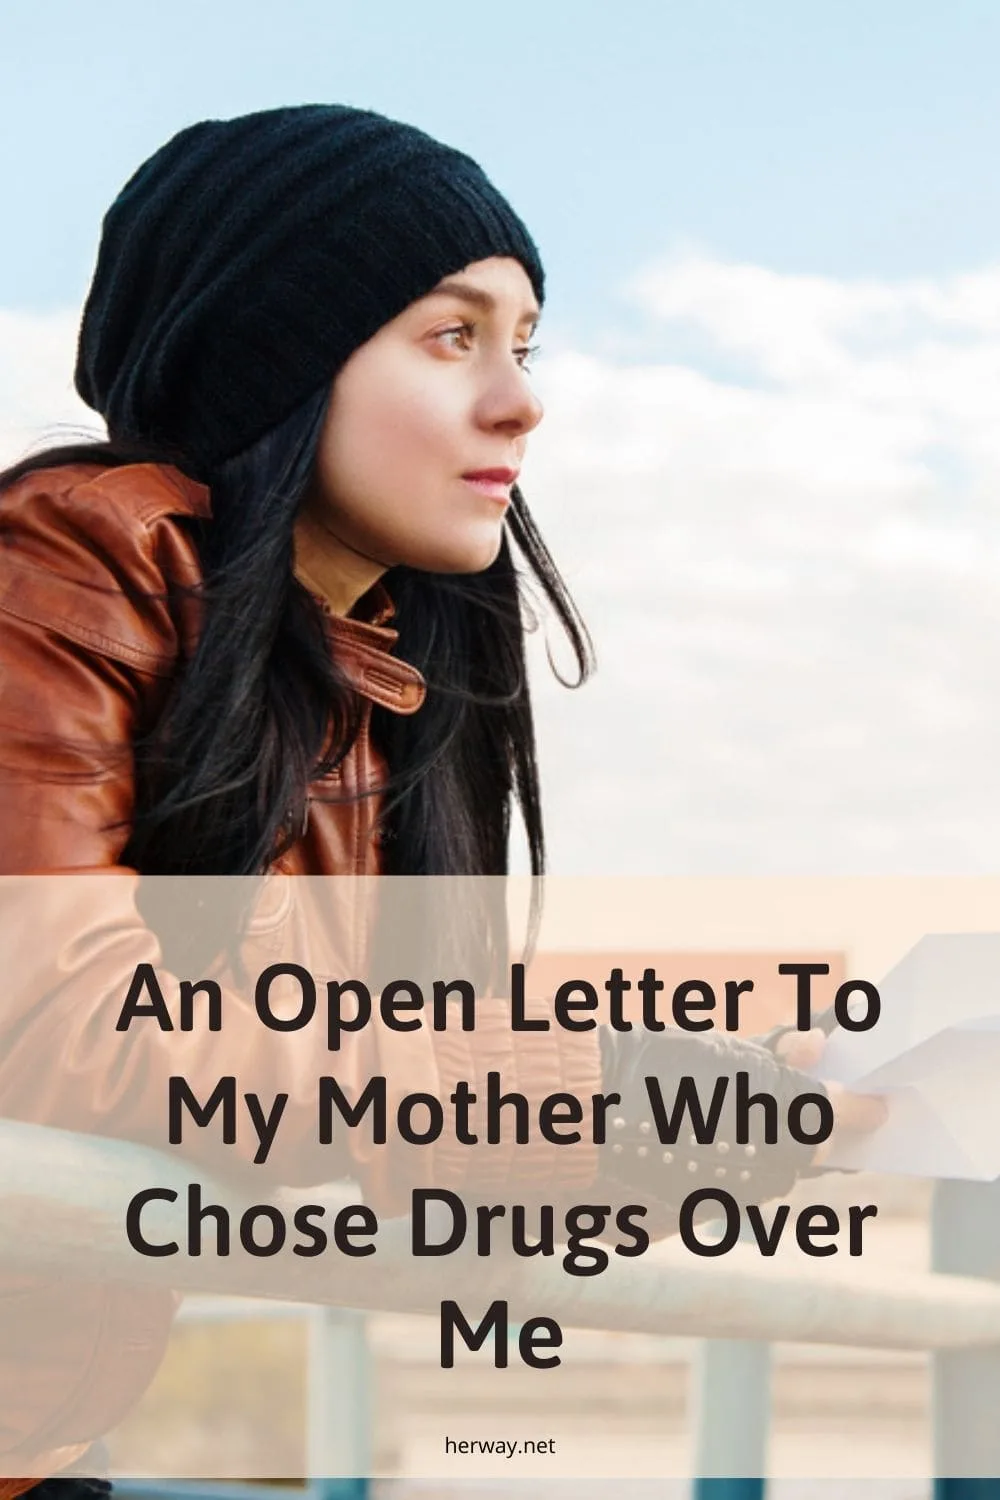 An Open Letter To My Mother Who Chose Drugs Over Me